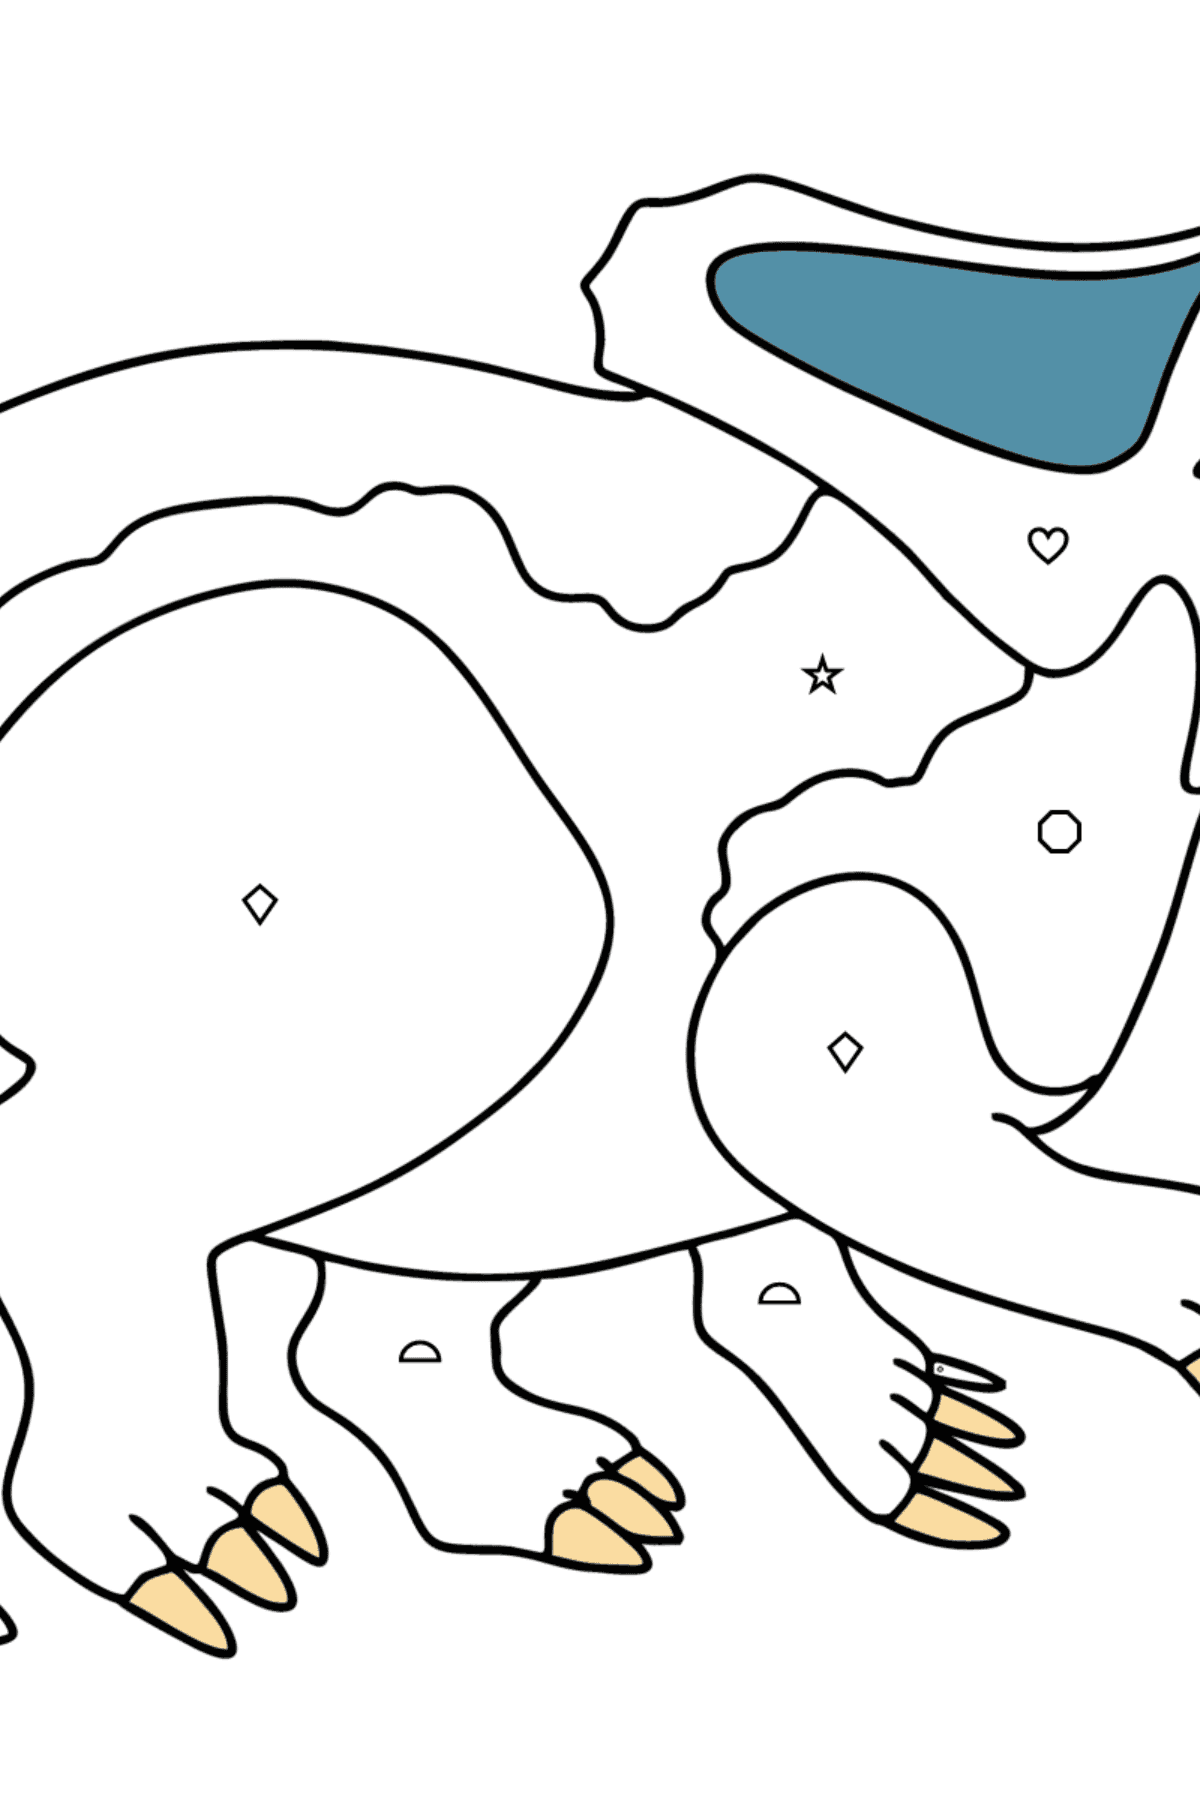 Protoceratops coloring page - Coloring by Geometric Shapes for Kids